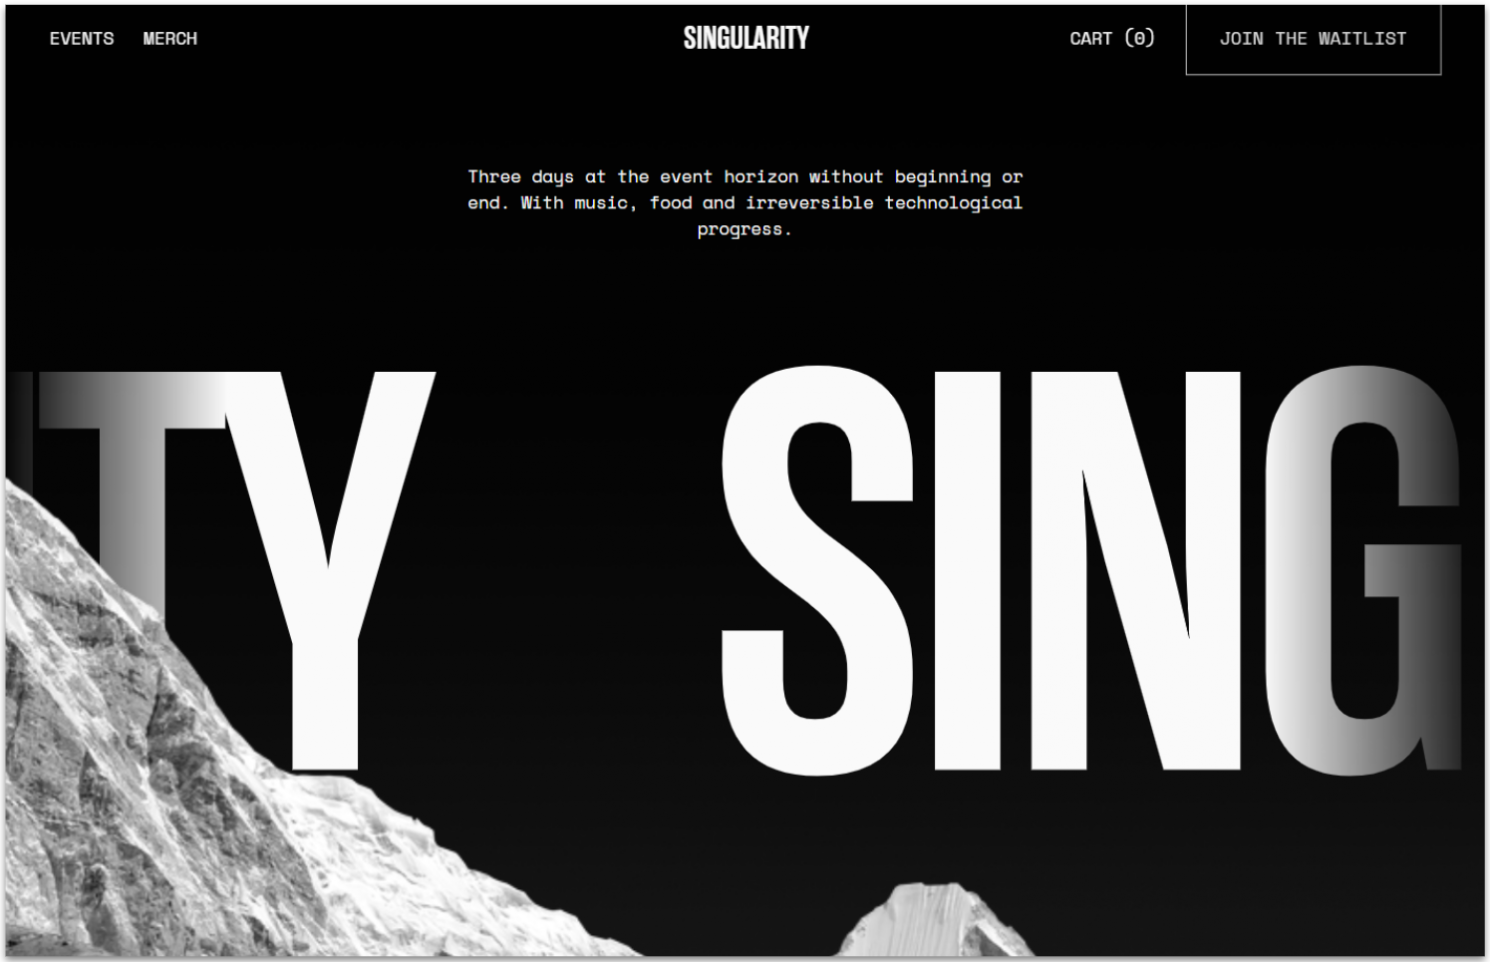 Squarespace's Singularity template homepage